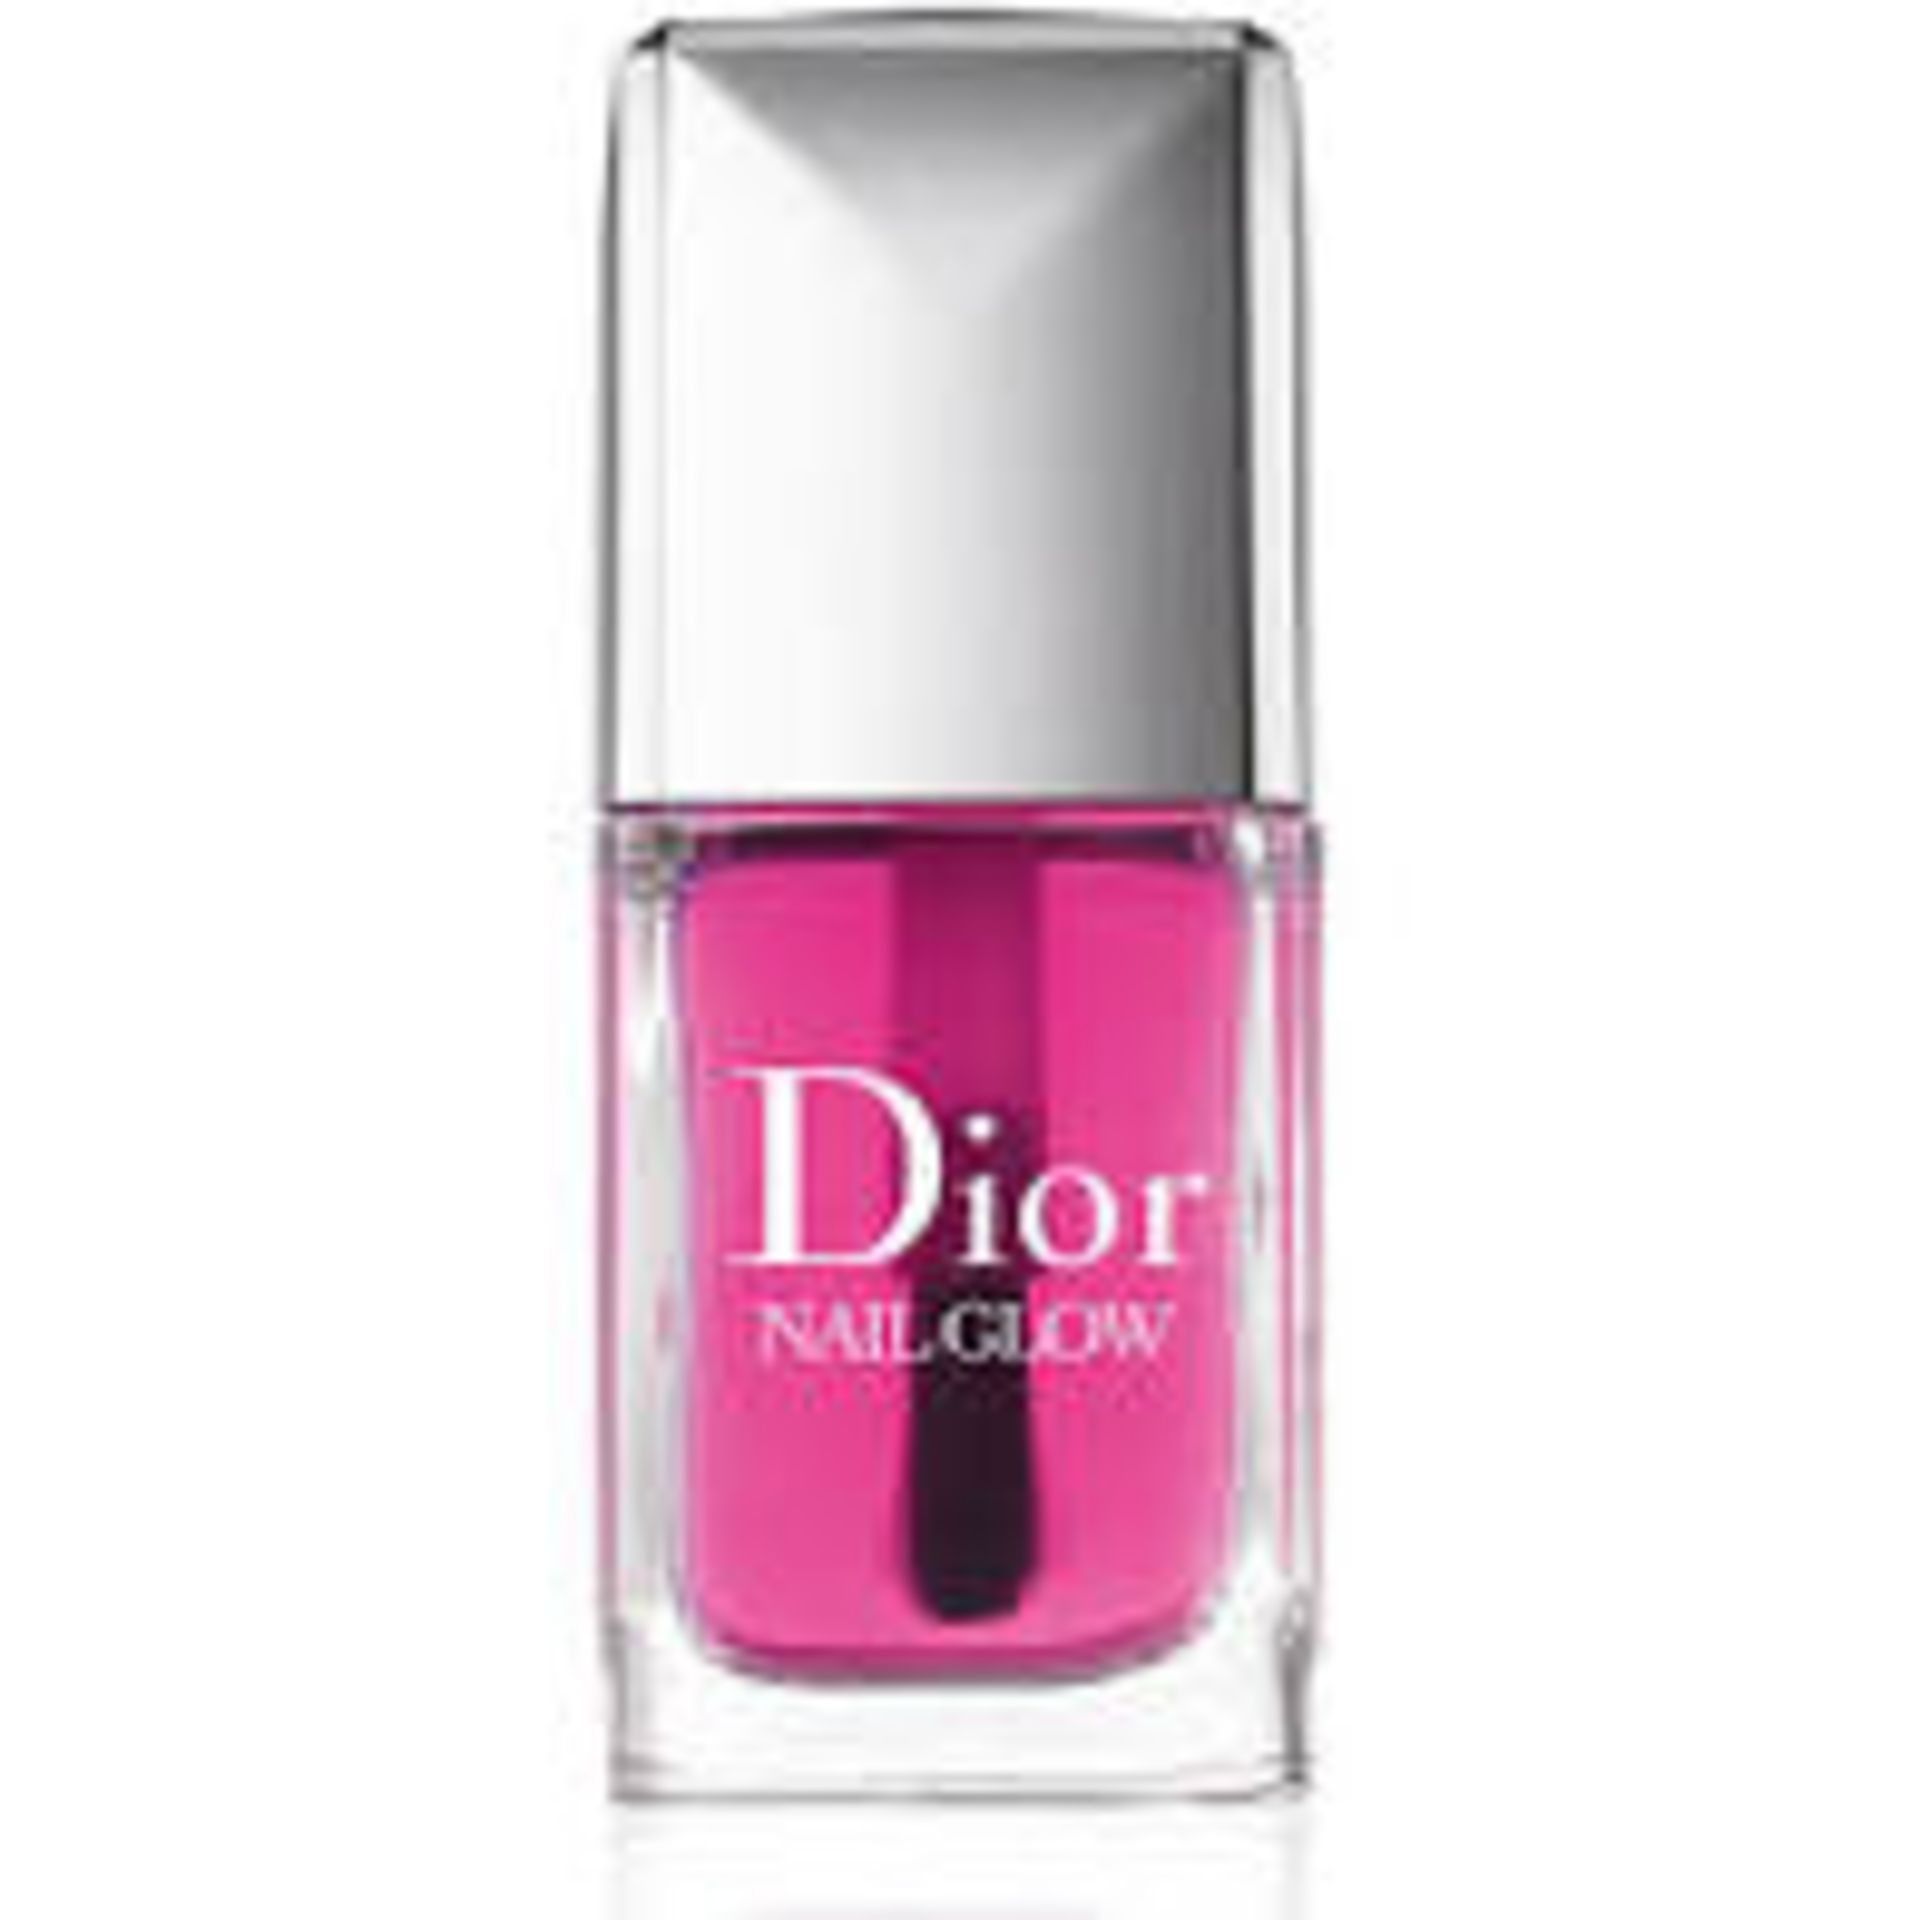 RRP £21 Dior Nail Glow (Ex Display) (Pictures Are For Illustration Purposes Only) (Appraisals